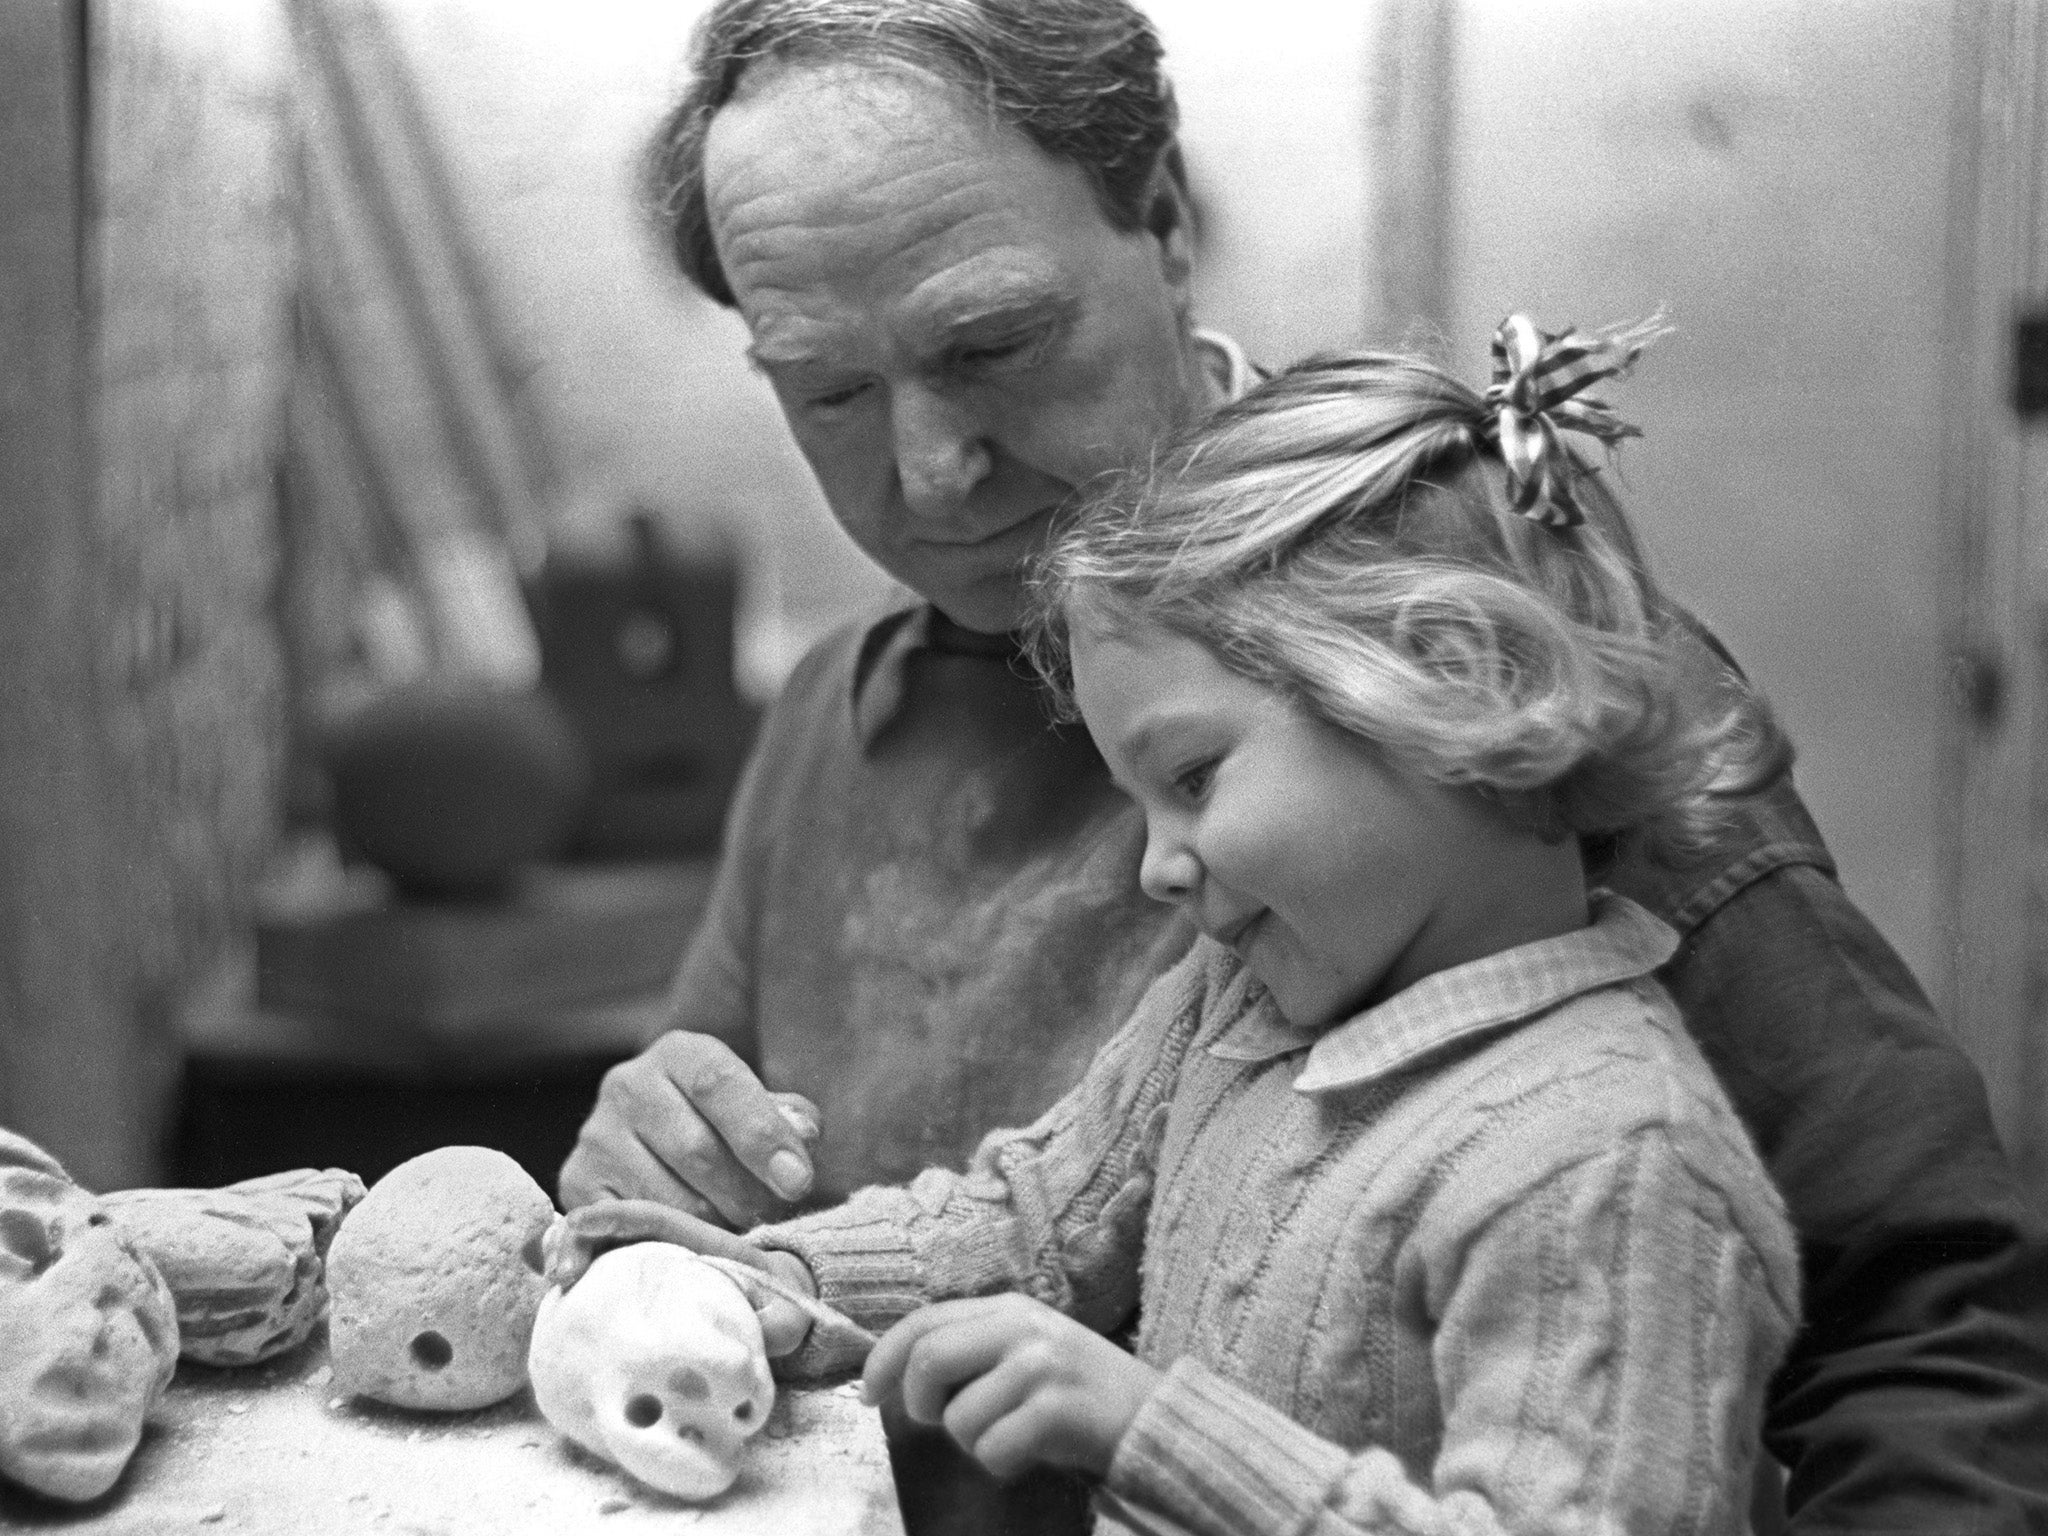 Moore in the workshop with his daughter Mary